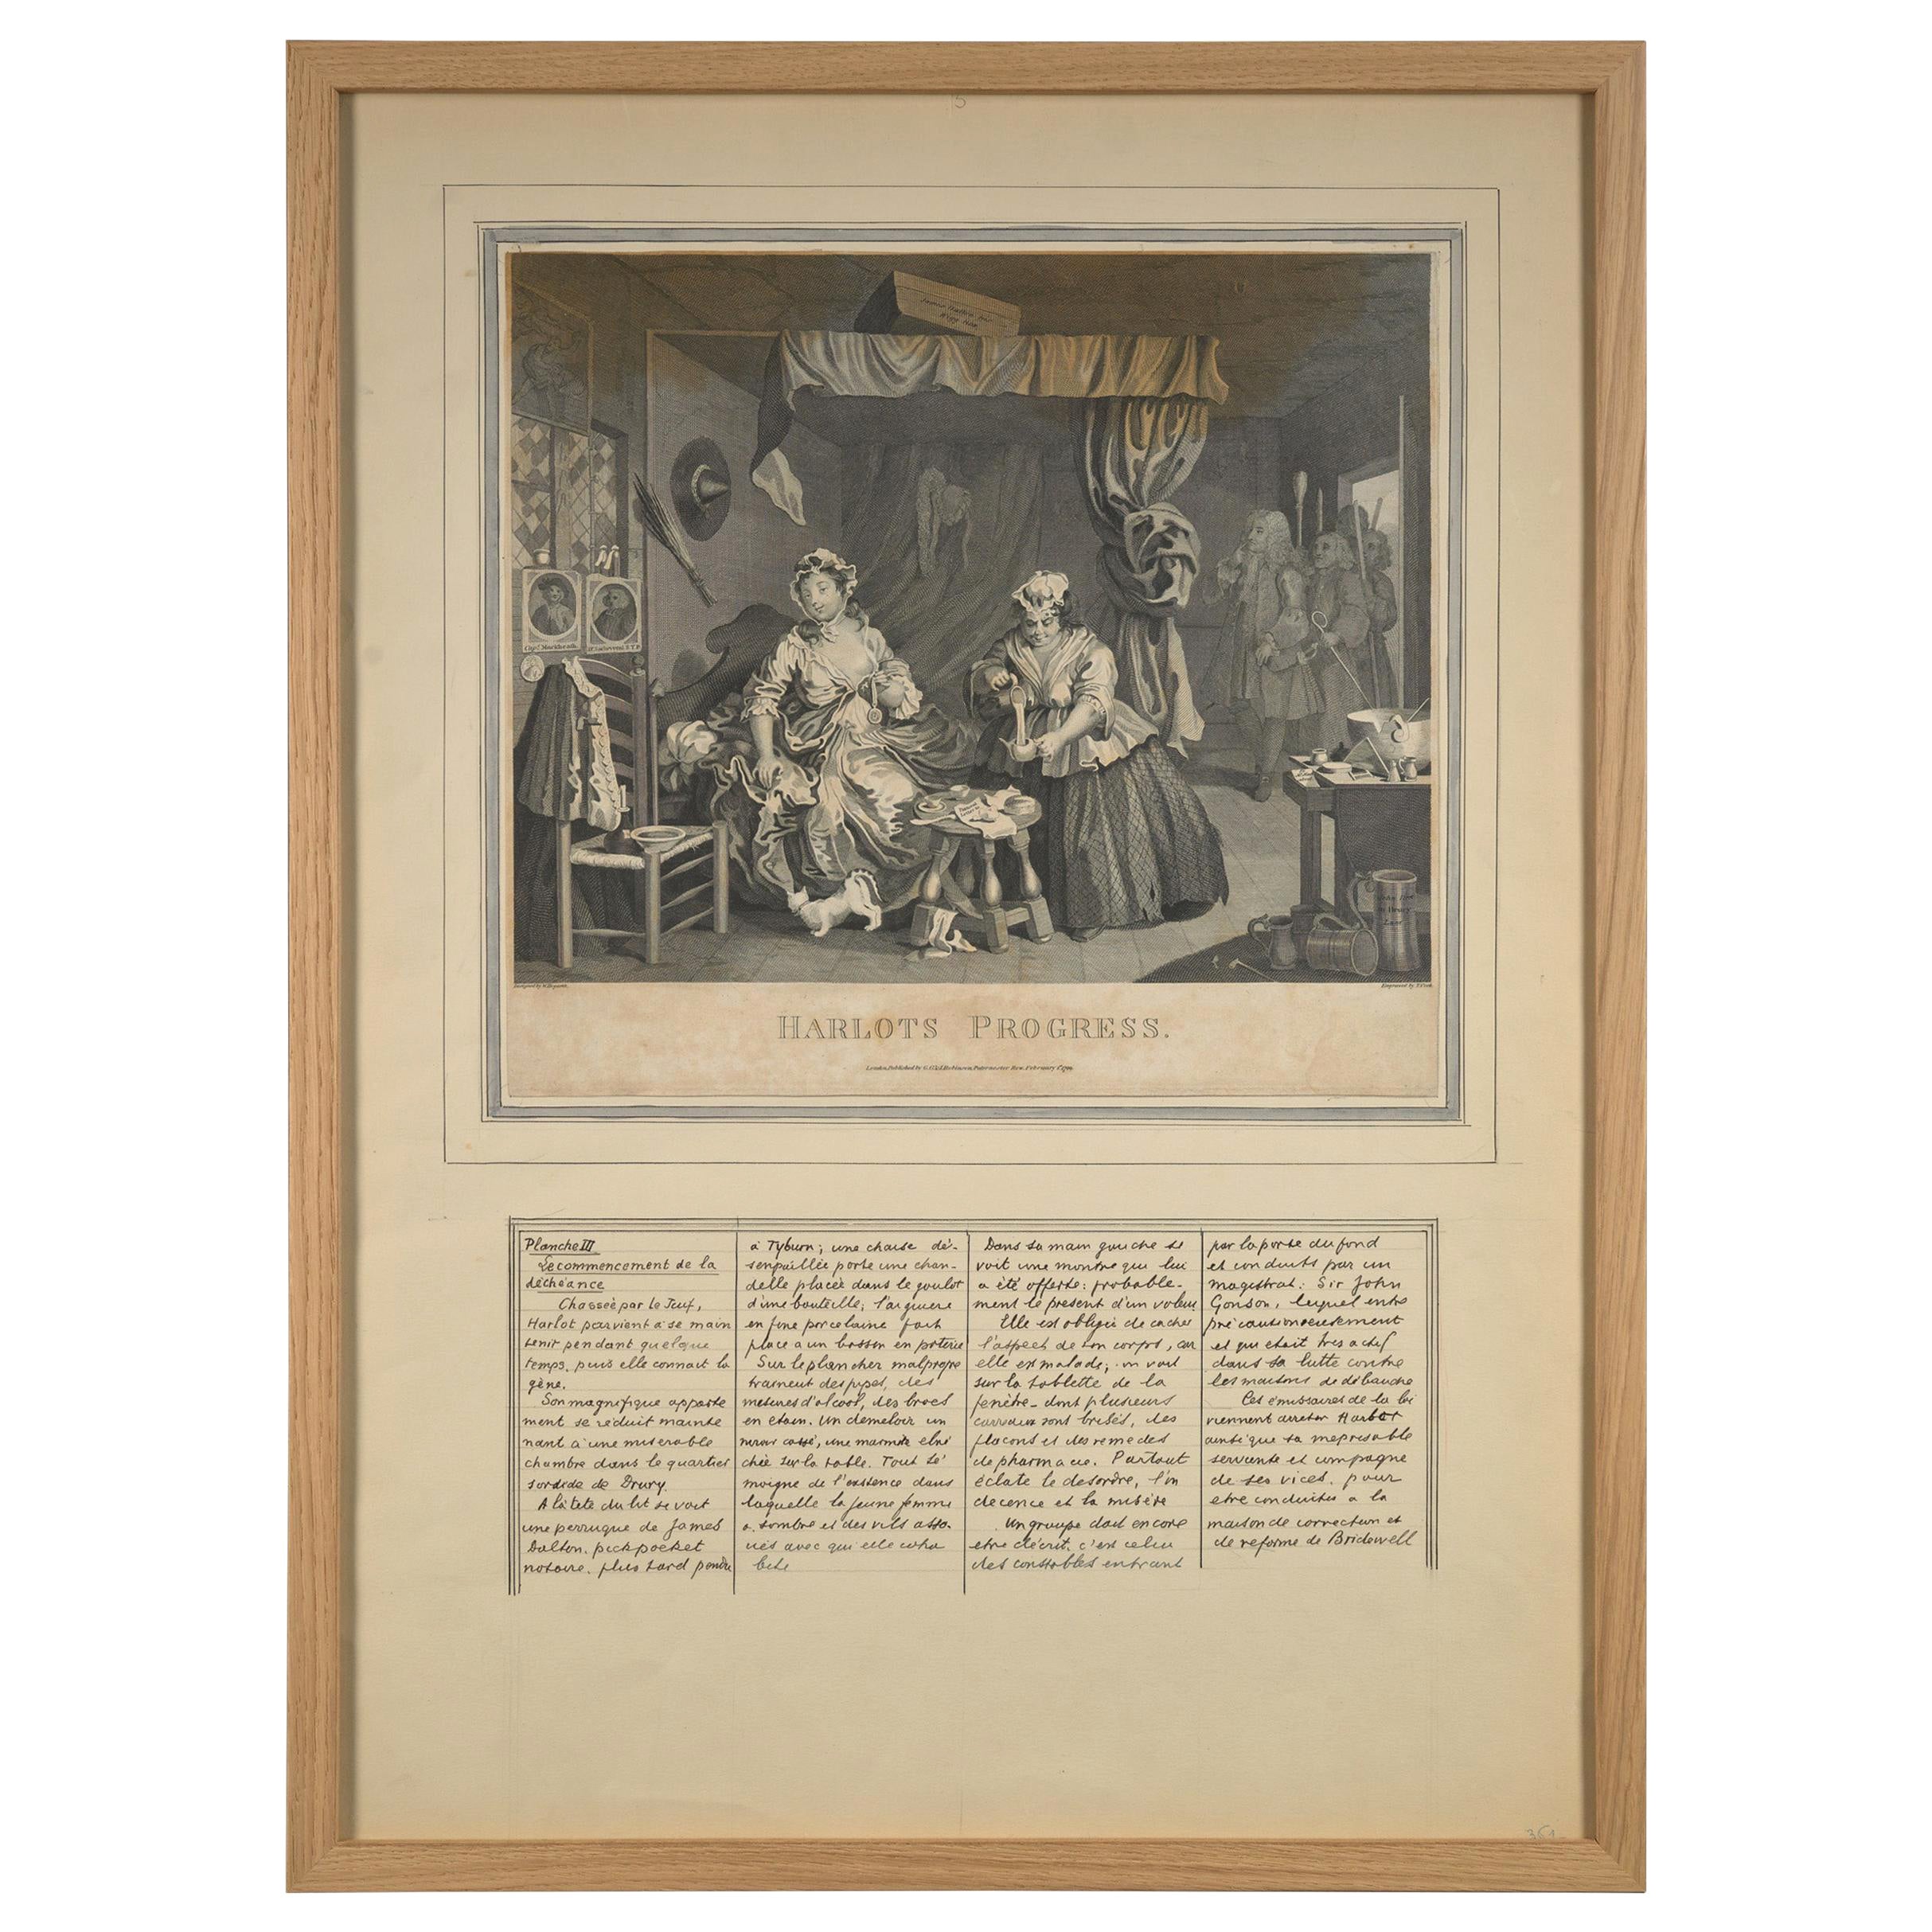 William Hogarth, Harlot's Progress, Litographs with French Comments